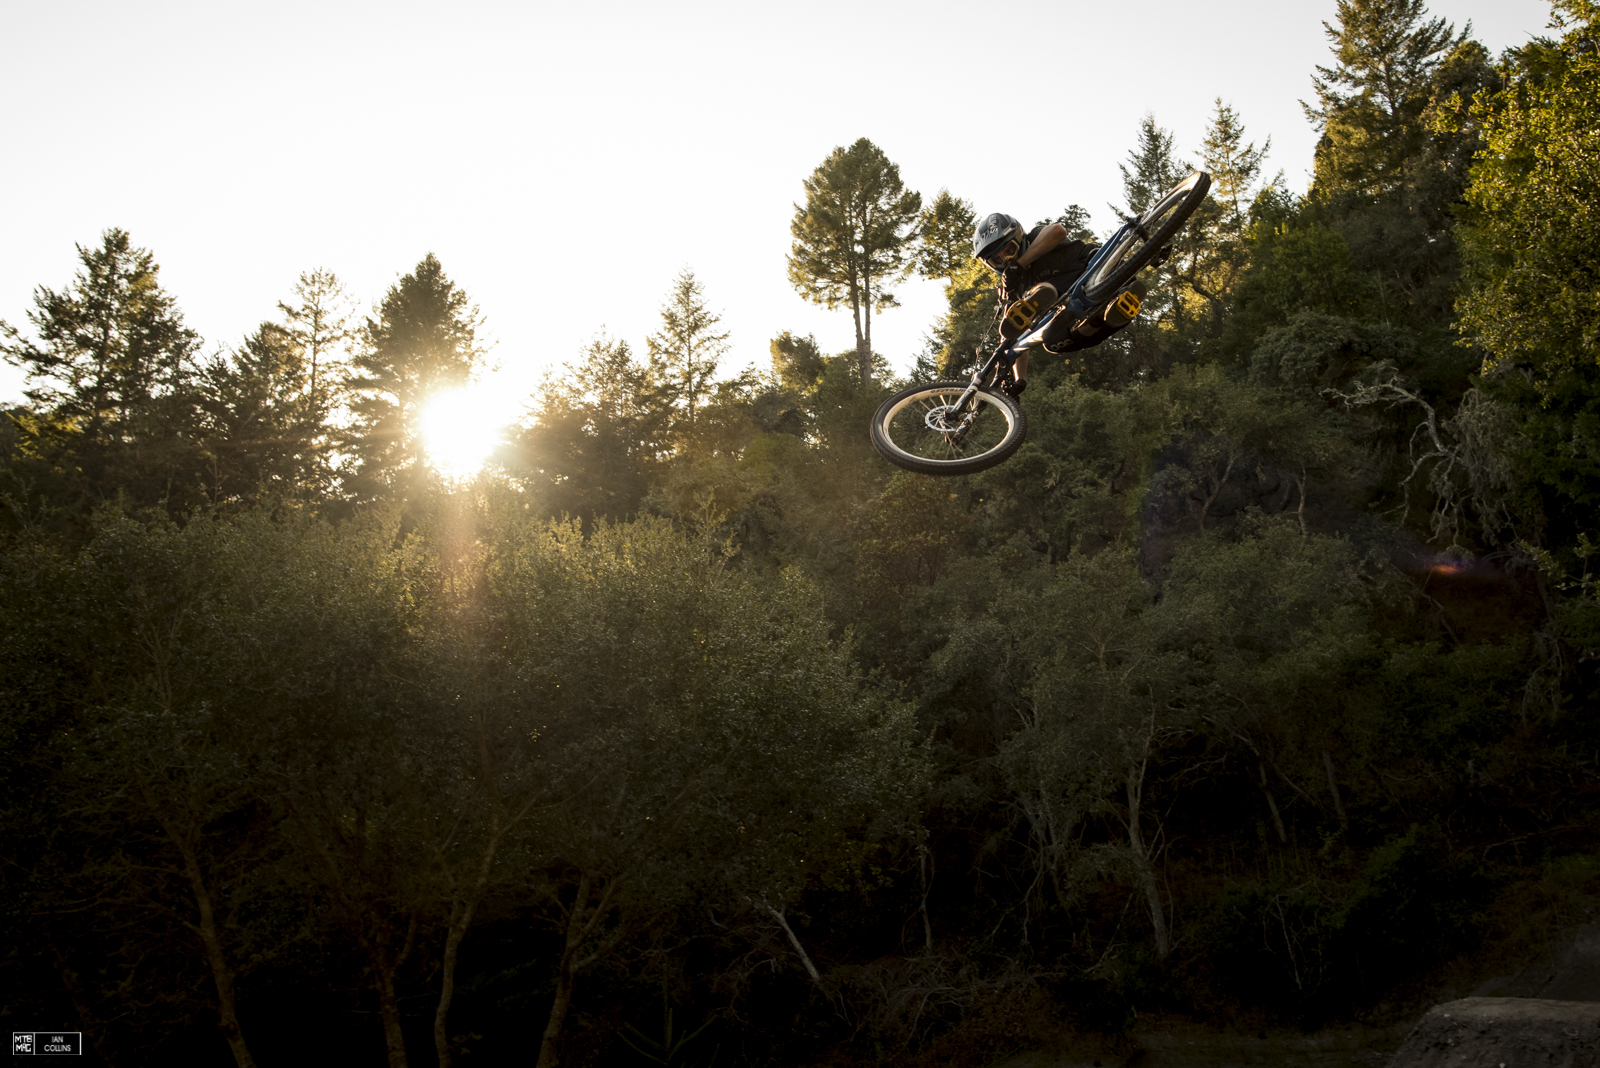 R-Dog whipping into golden hour. It should actually be called golden 10 minutes from a photographers standpoint.